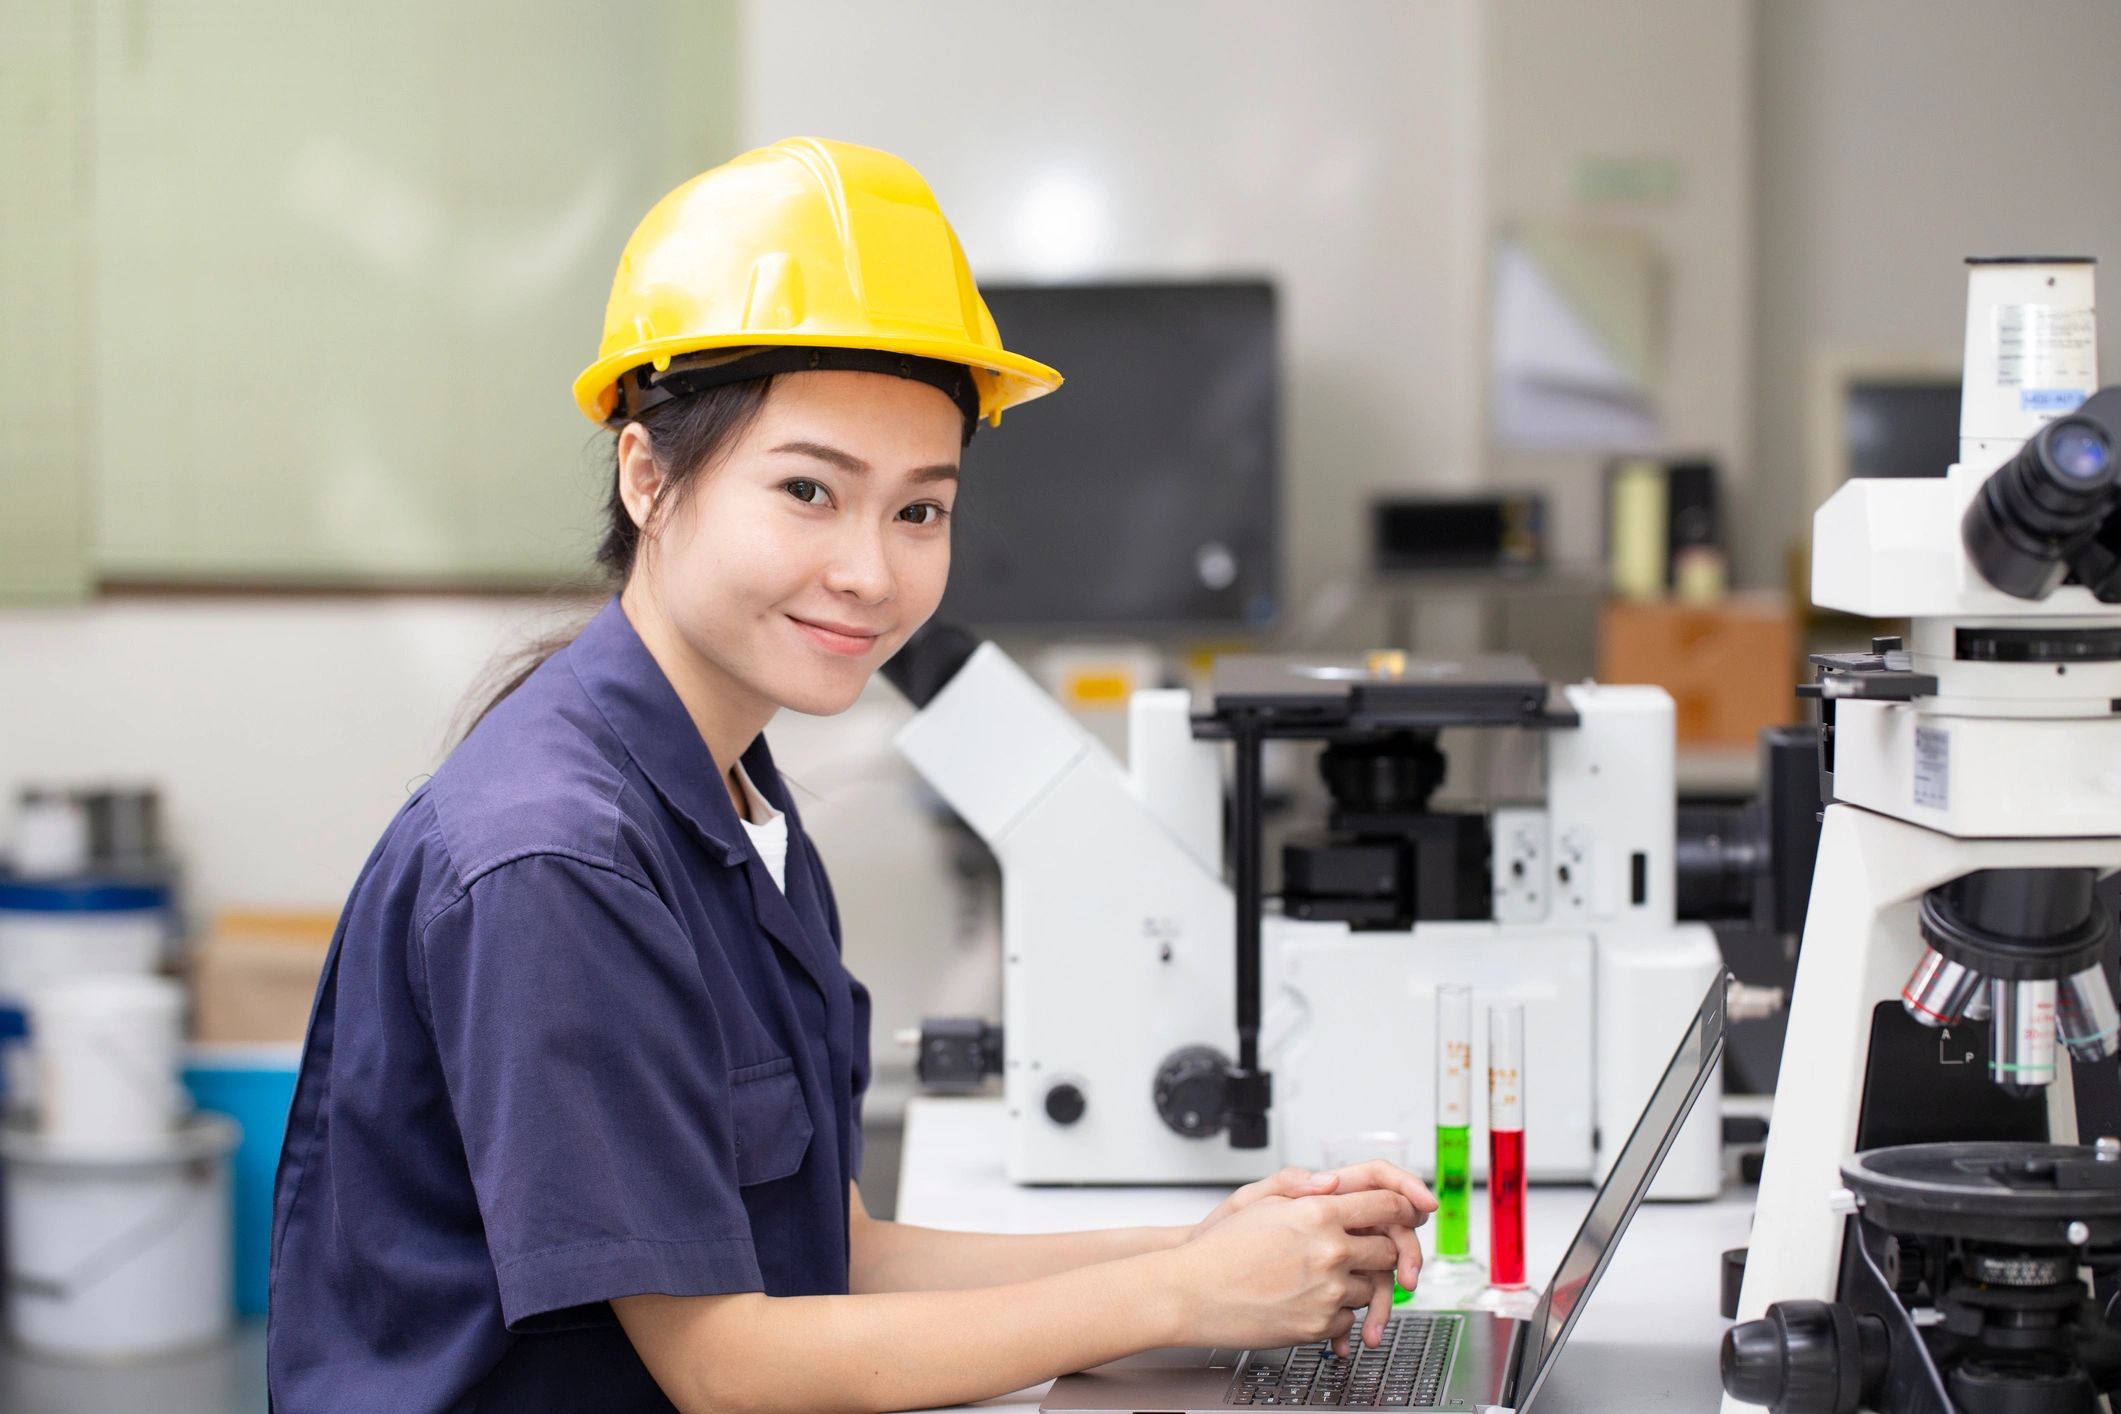 Industrial Technician with hard hat in lab with two microscopes